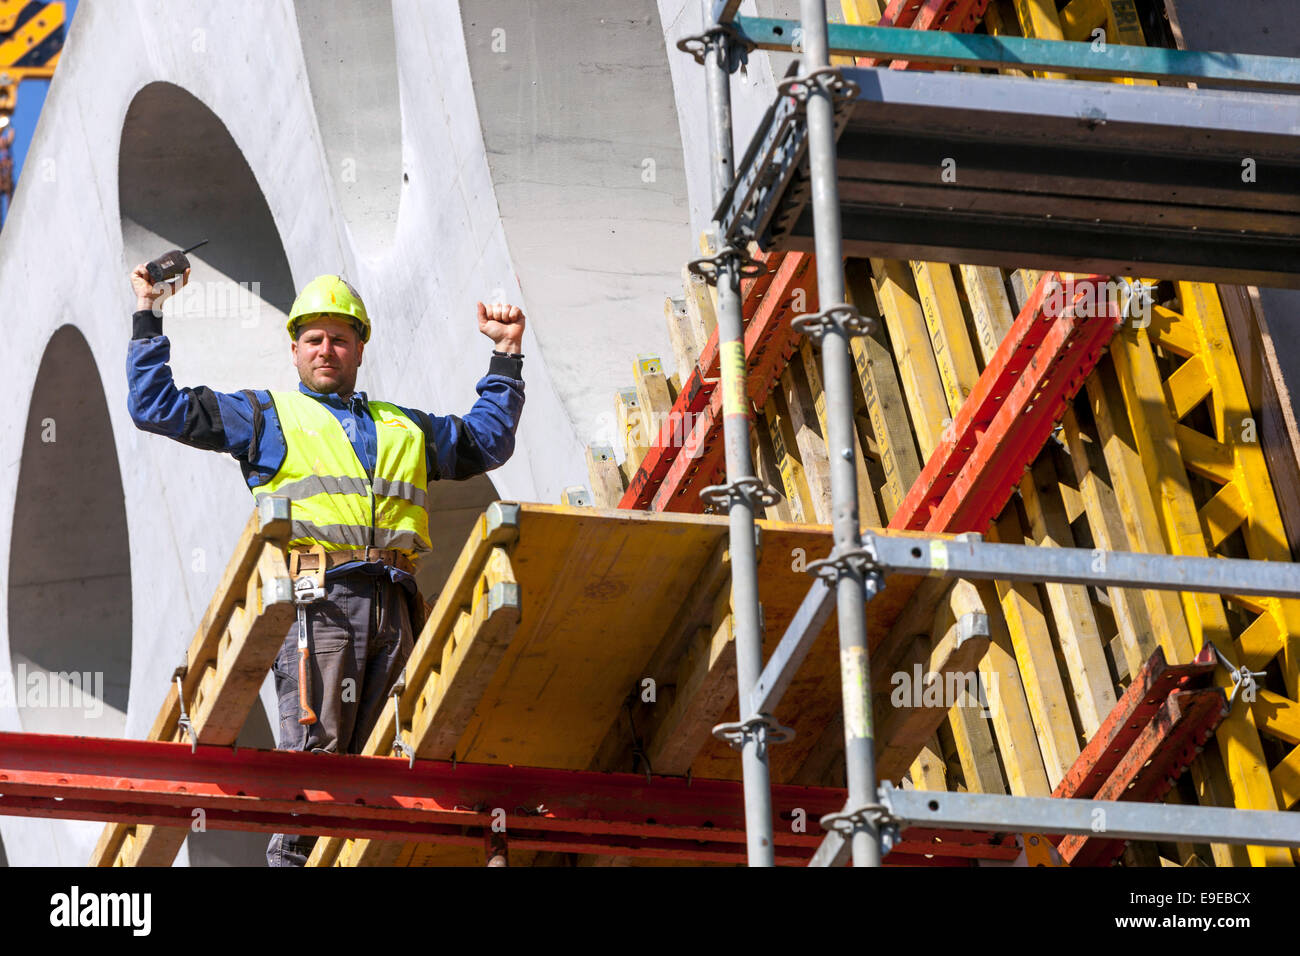 Scaffolding and construction of building, strong man scaffolding construction worker Stock Photo